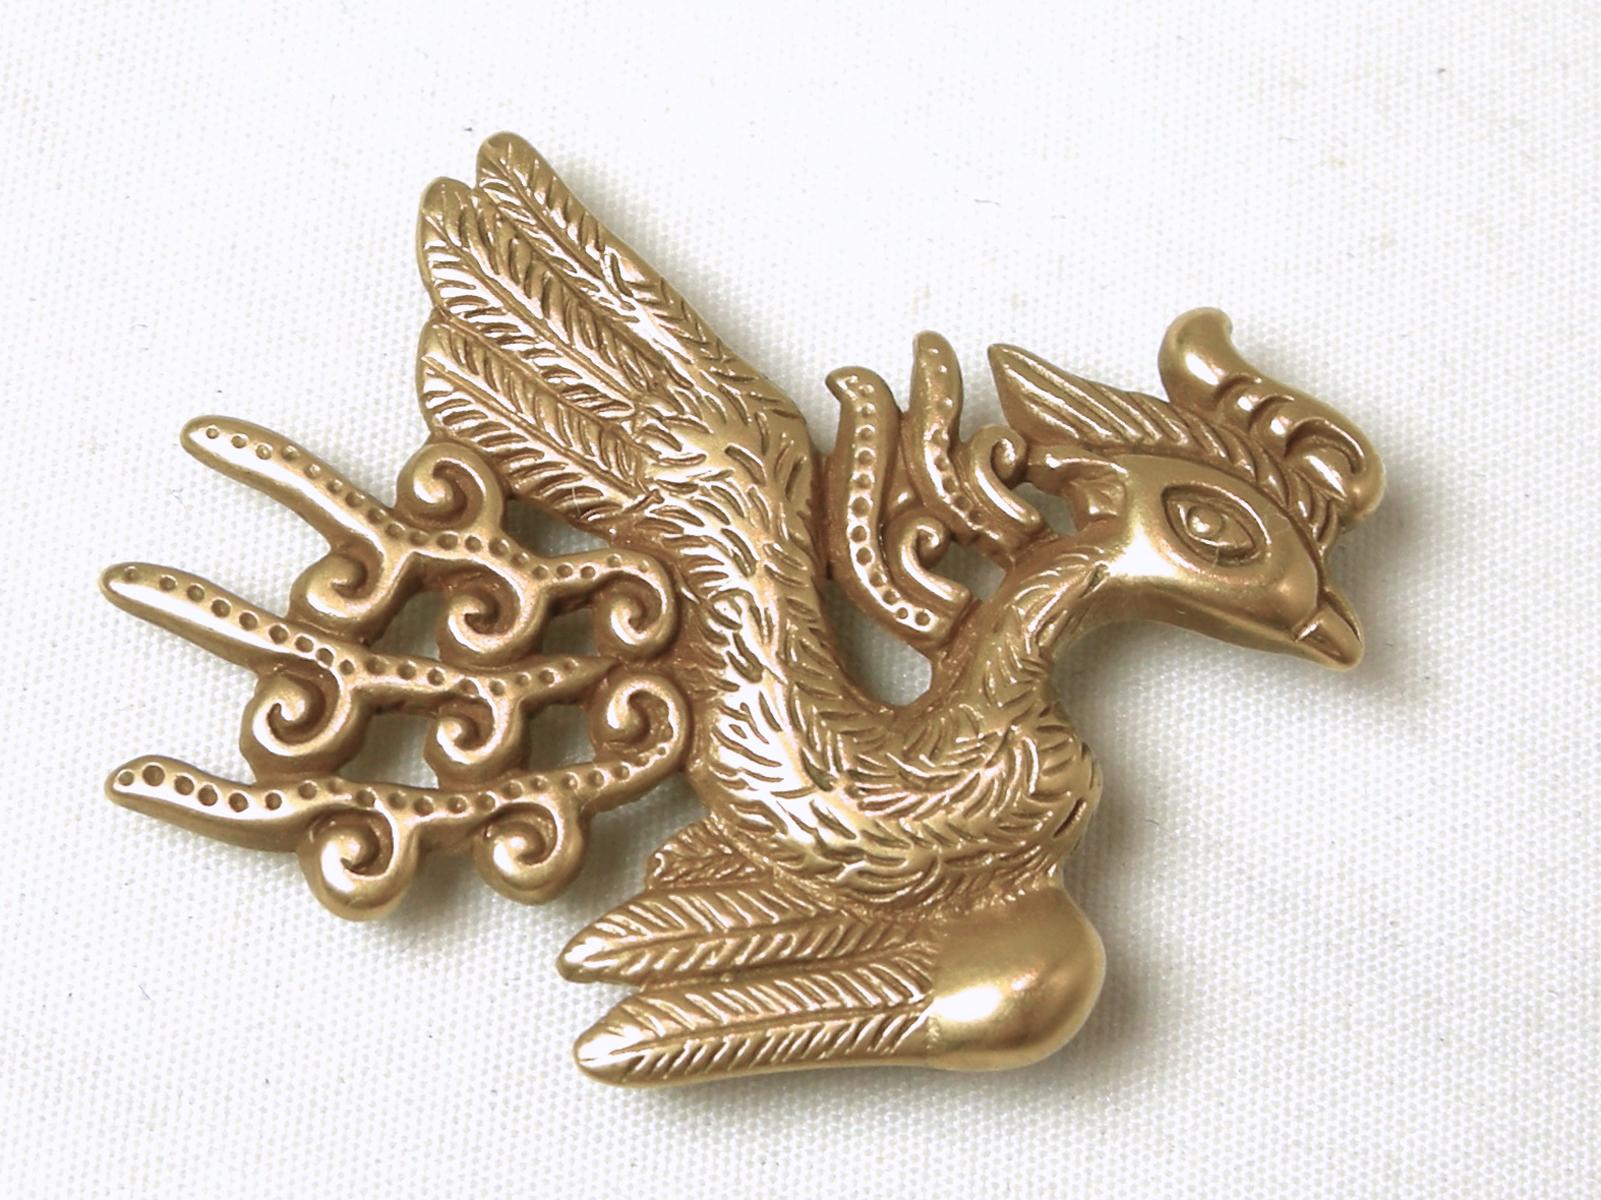 This signed MMA 1980 Metropolitan Museum of Art brooch has a phoenix bird design.   In excellent condition, this brooch-pendant measures 1-1/2” x 1-1/4” and is signed “MMA 1980”.  It also comes with the original box and info card.  